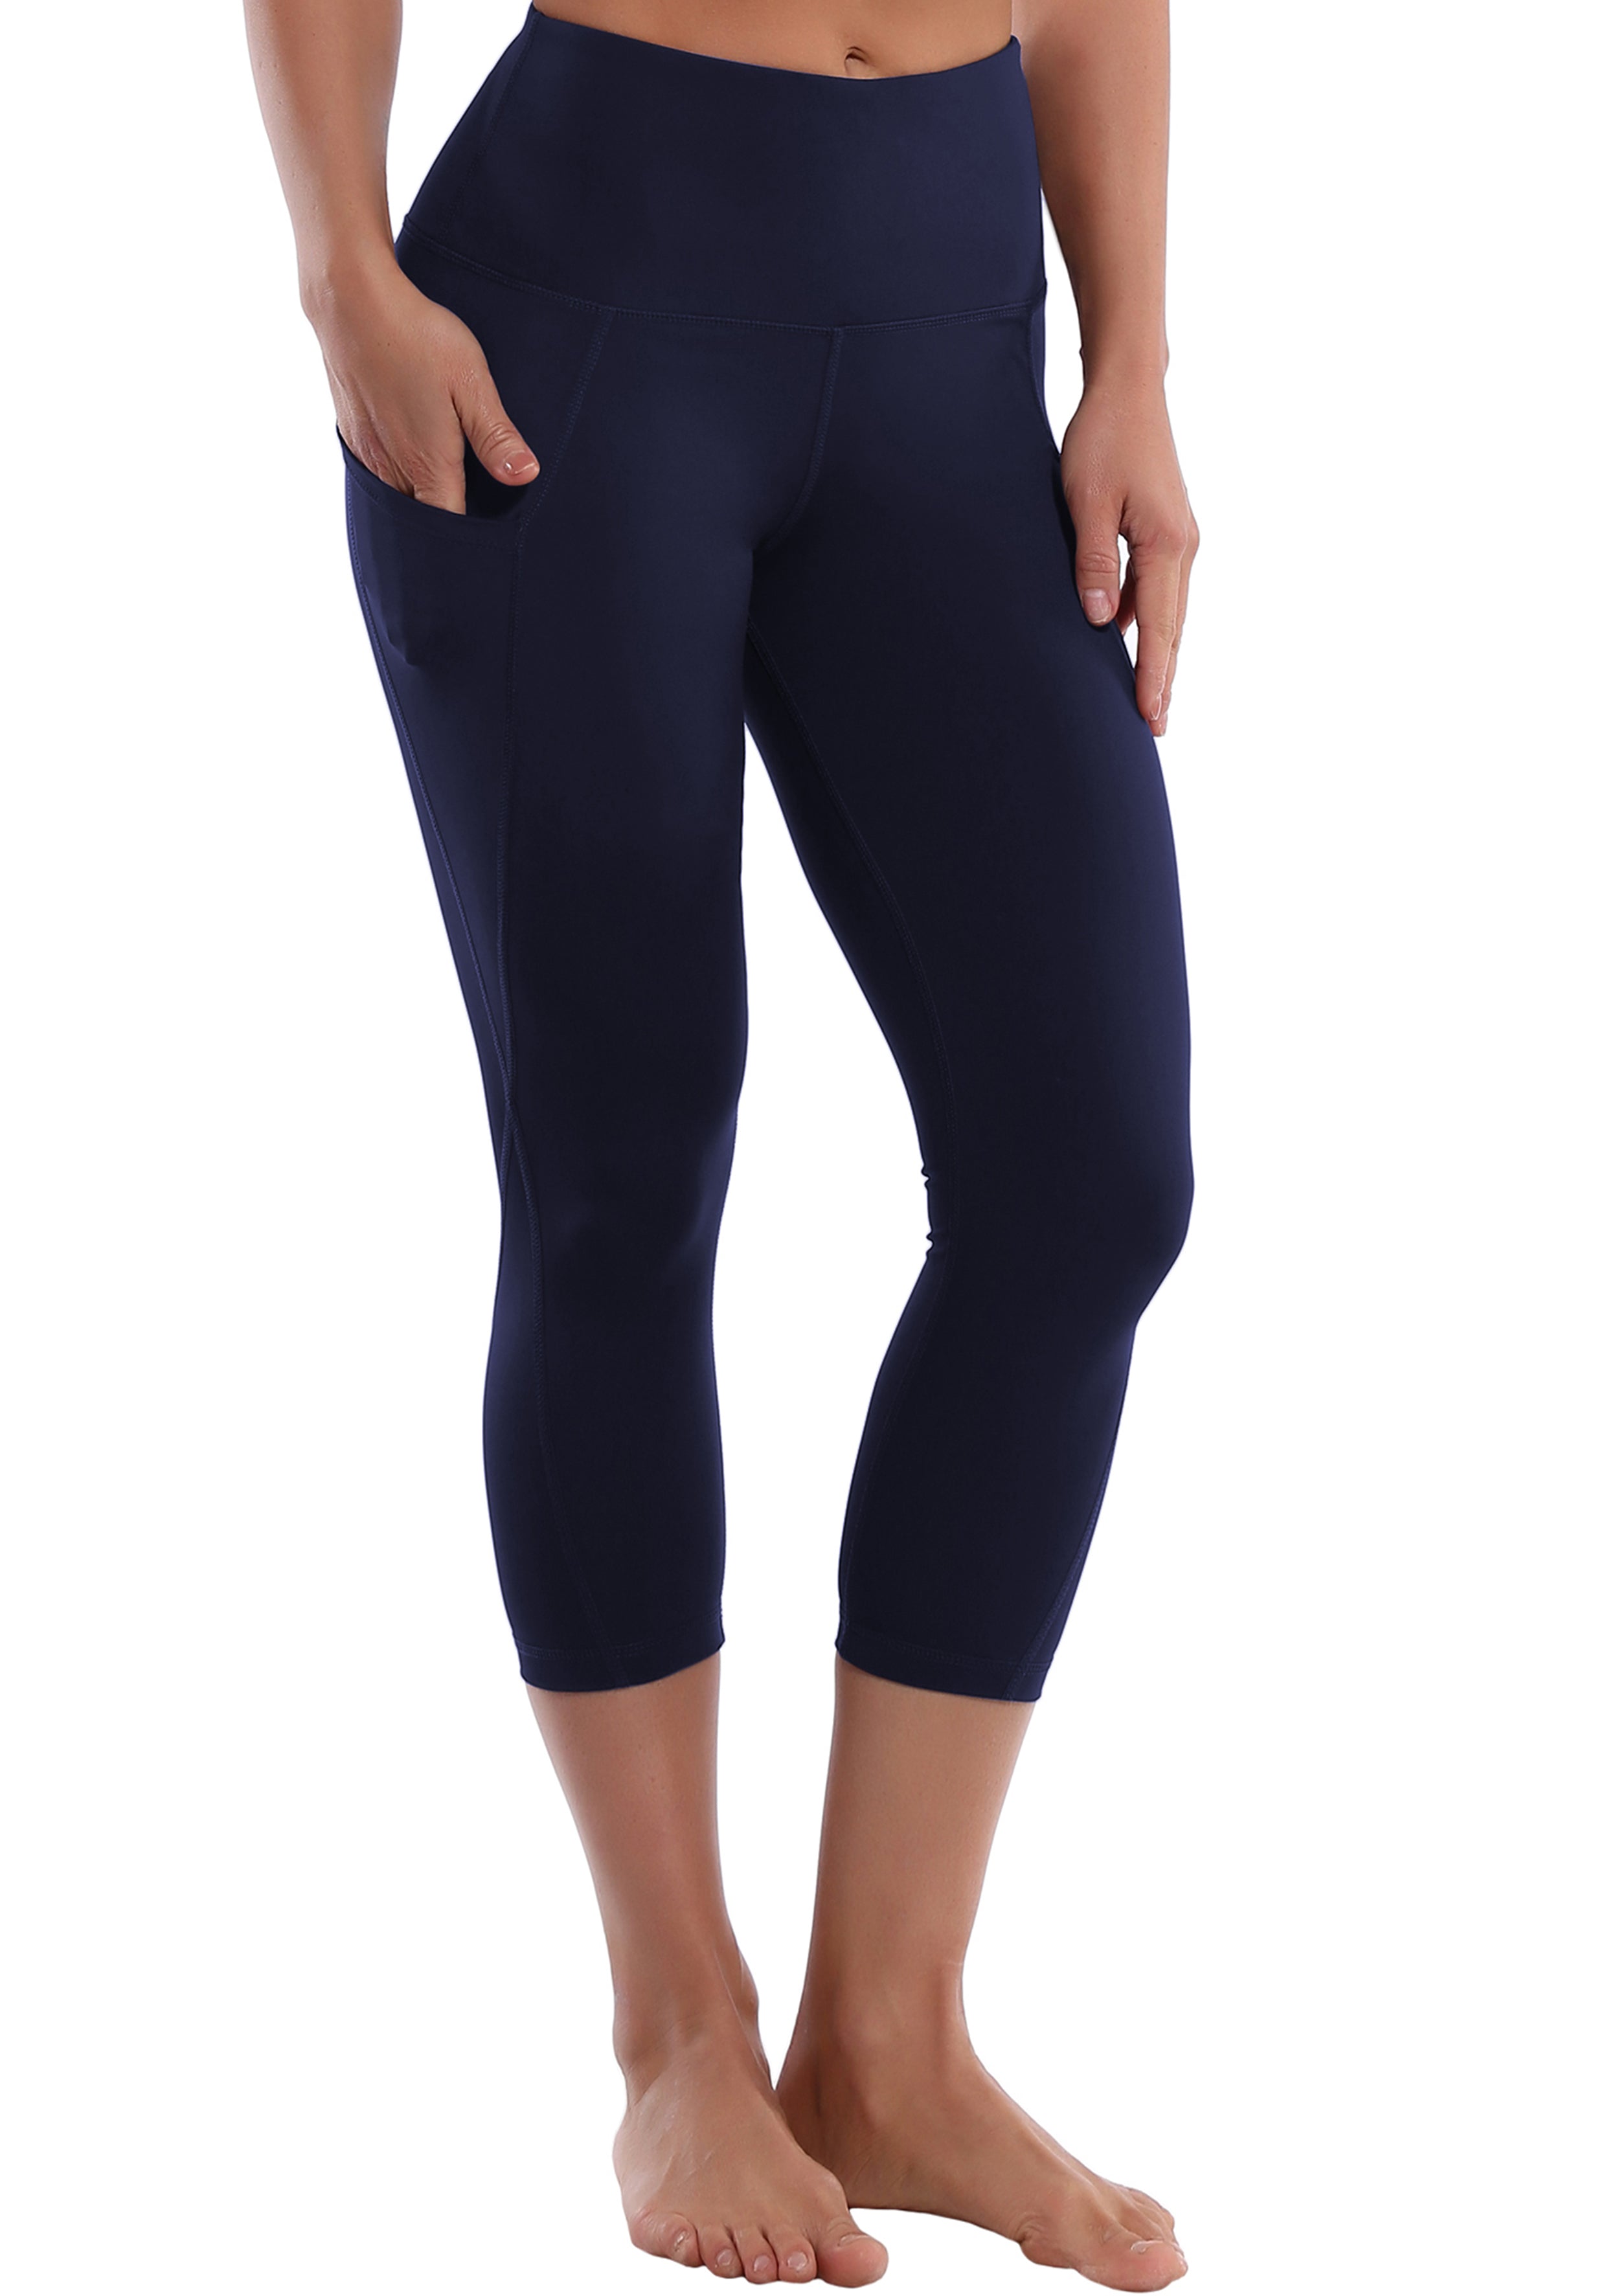 19" High Waist Side Pockets Capris darknavy 75%Nylon/25%Spandex Fabric doesn't attract lint easily 4-way stretch No see-through Moisture-wicking Tummy control Inner pocket